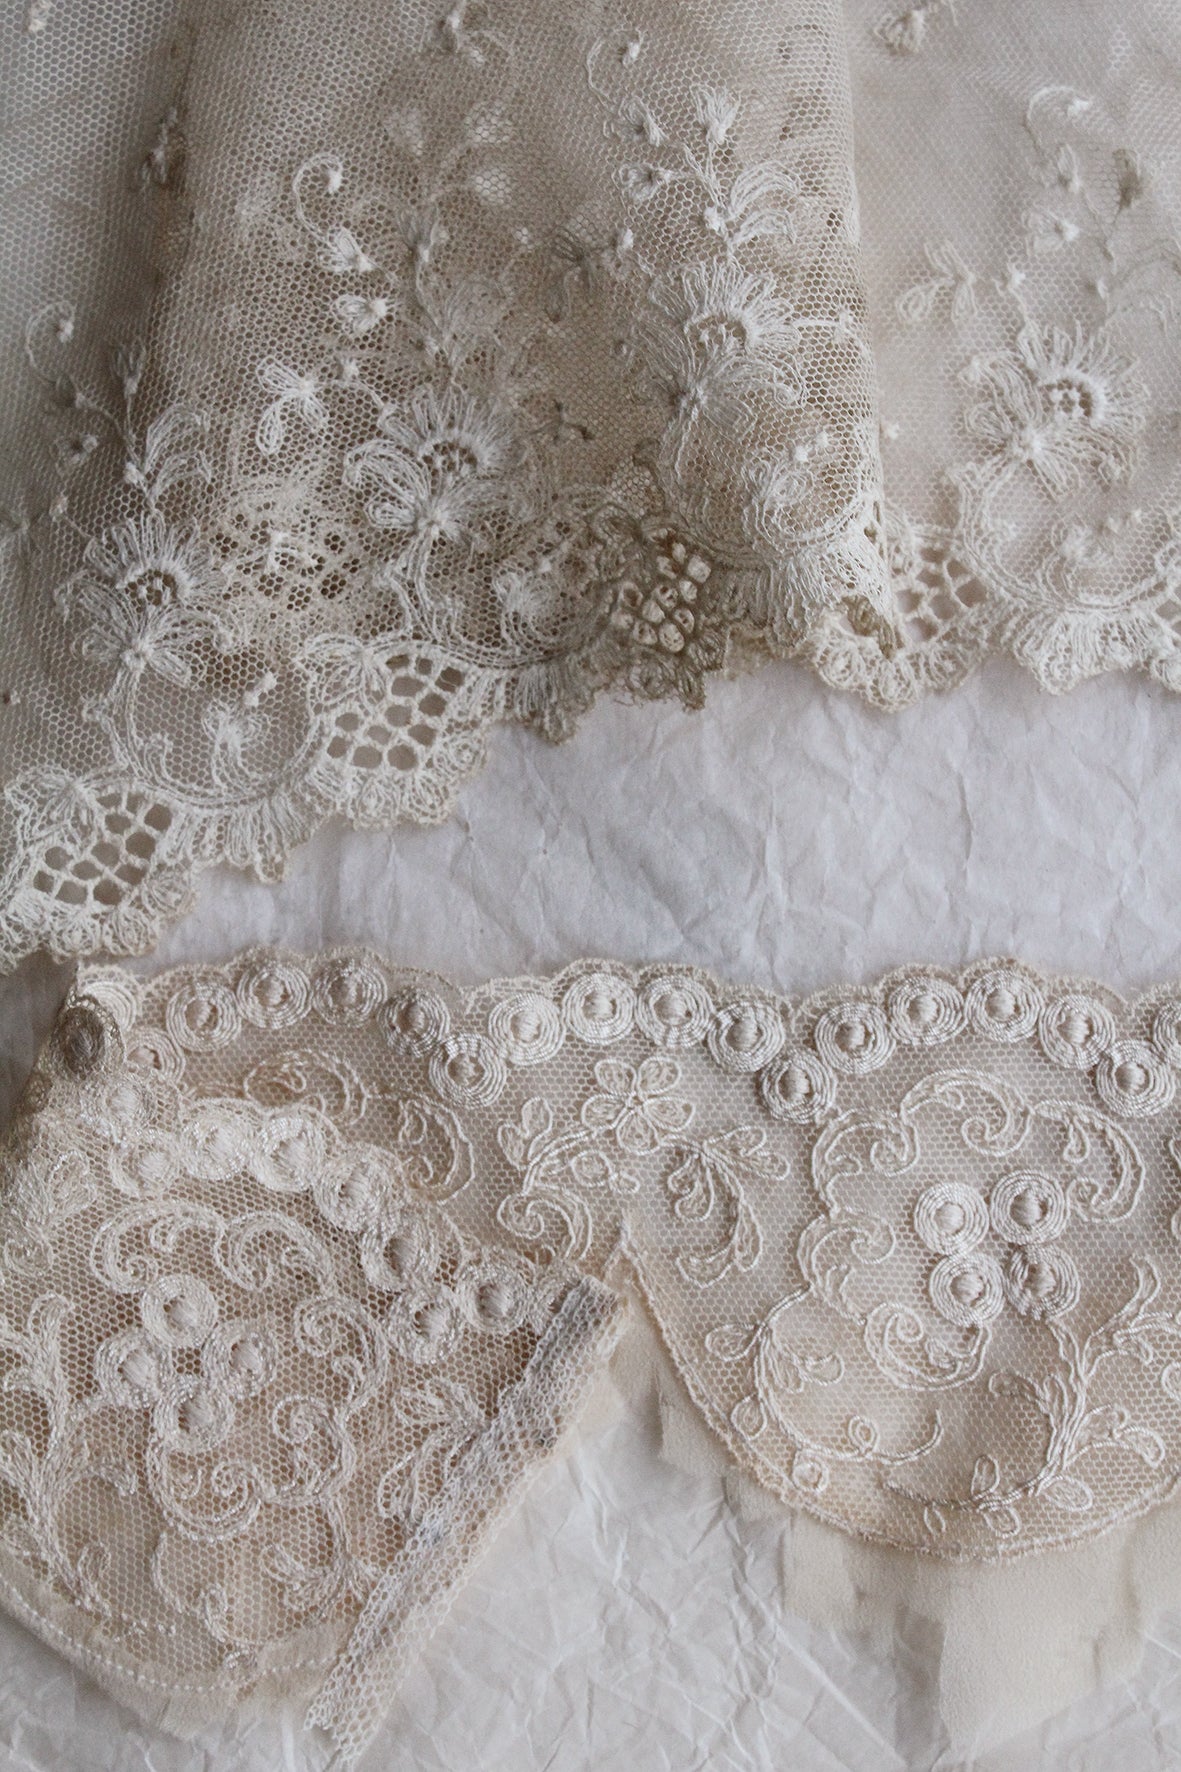 Collection of Antique Lace Samples - B3